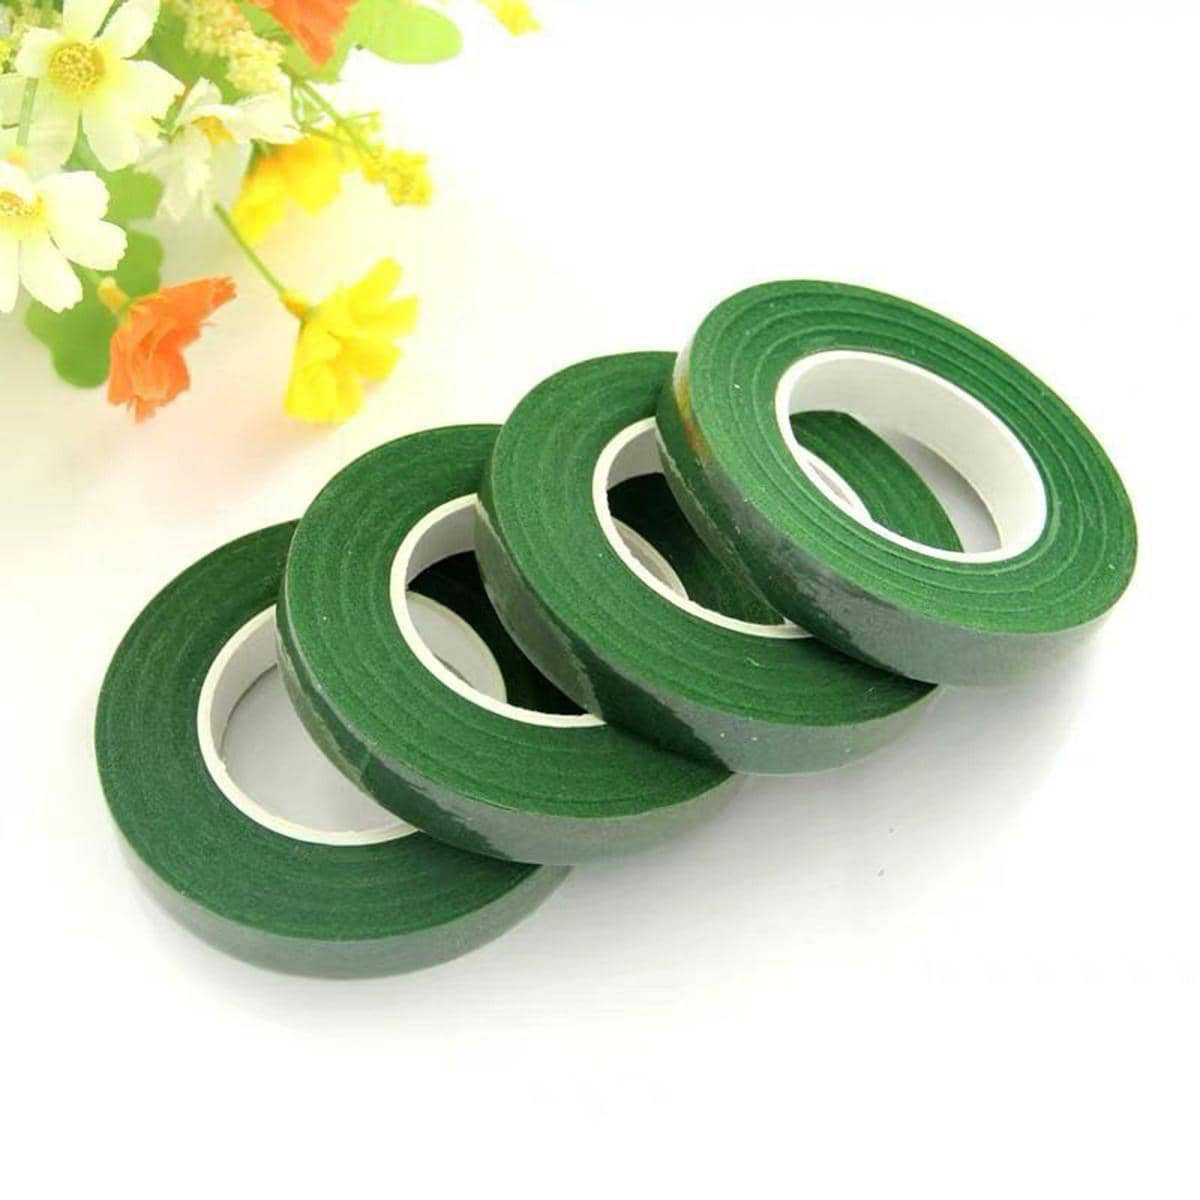 5 Rolls of Floral Stem Wrapping Tape Floral Tape Florist Craft Projects  Tapes Wrapping Accessory